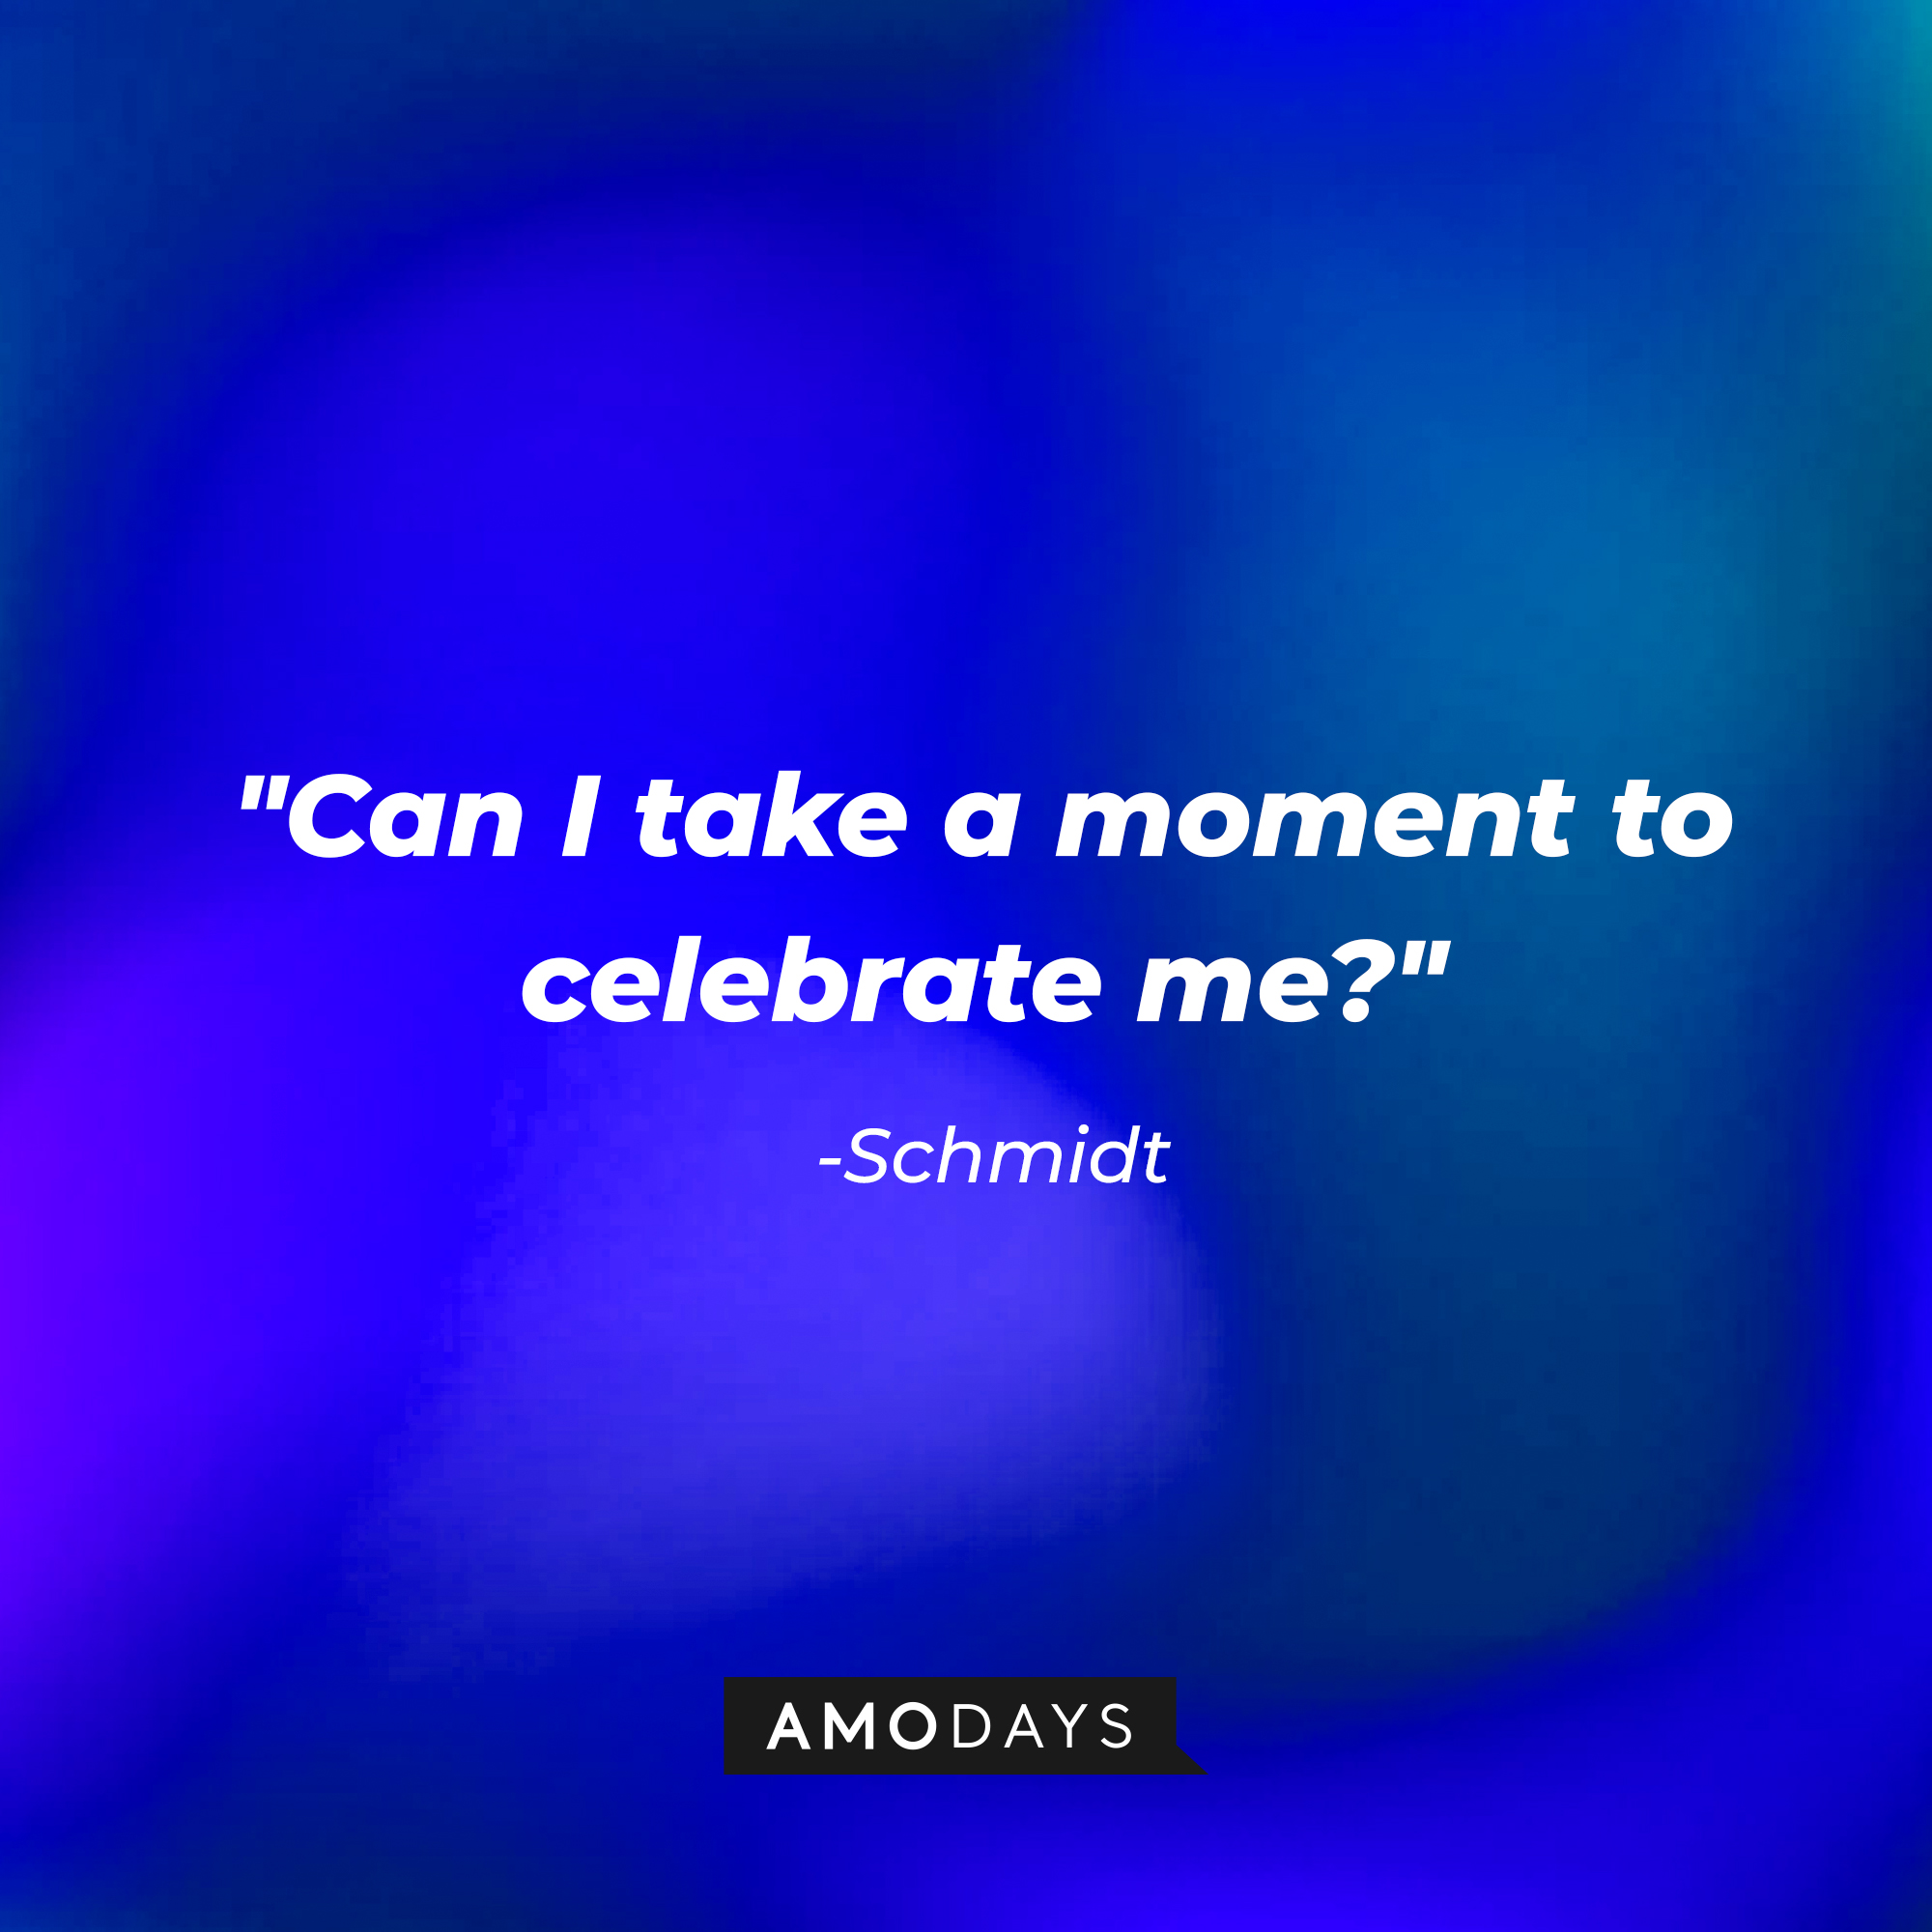 Schmidt's quote, "Can I take a moment to celebrate me?" | Source: Amodays